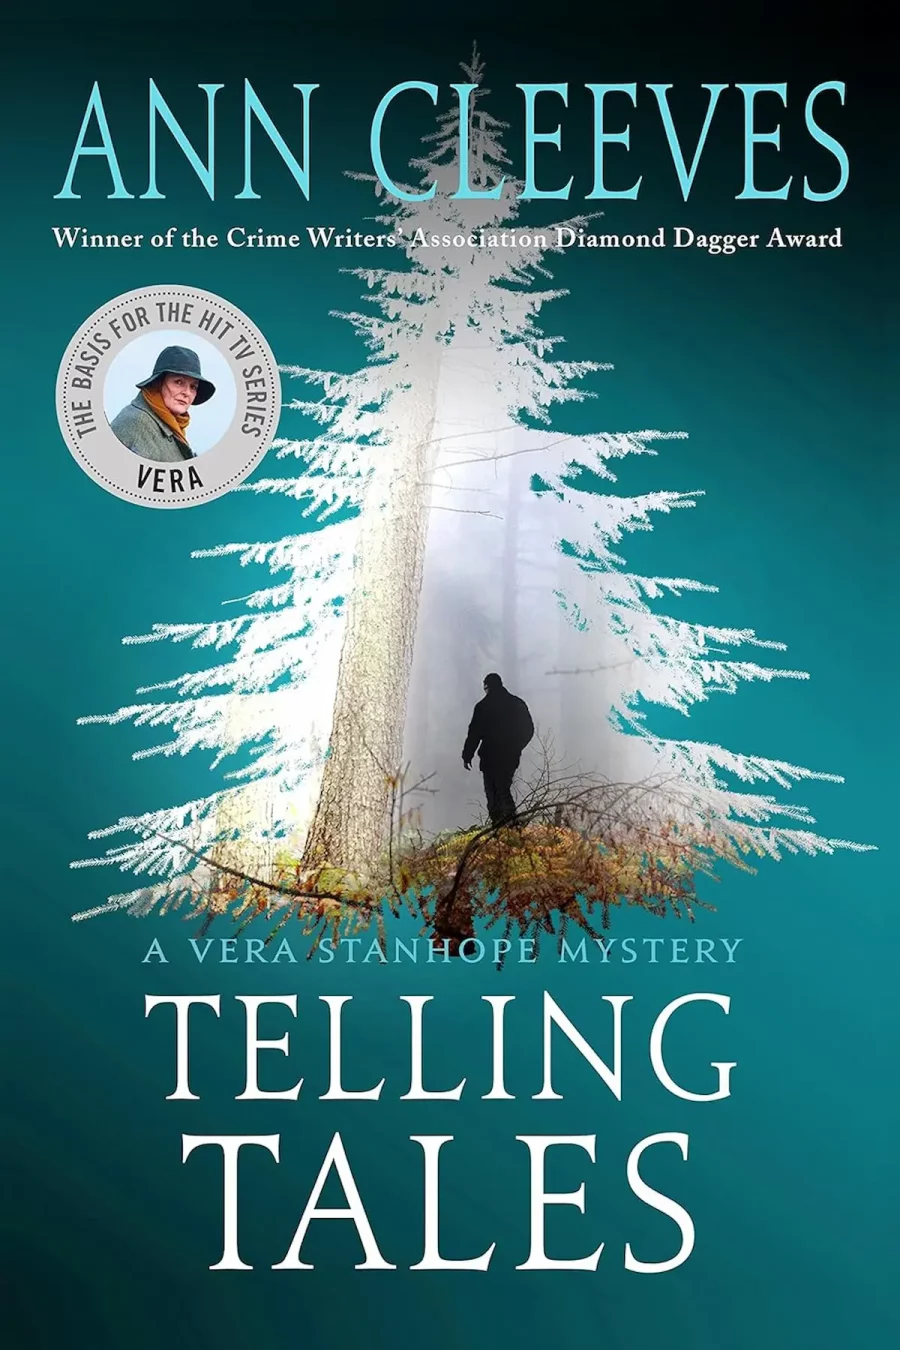 Telling Tales by Ann Cleeves (1)